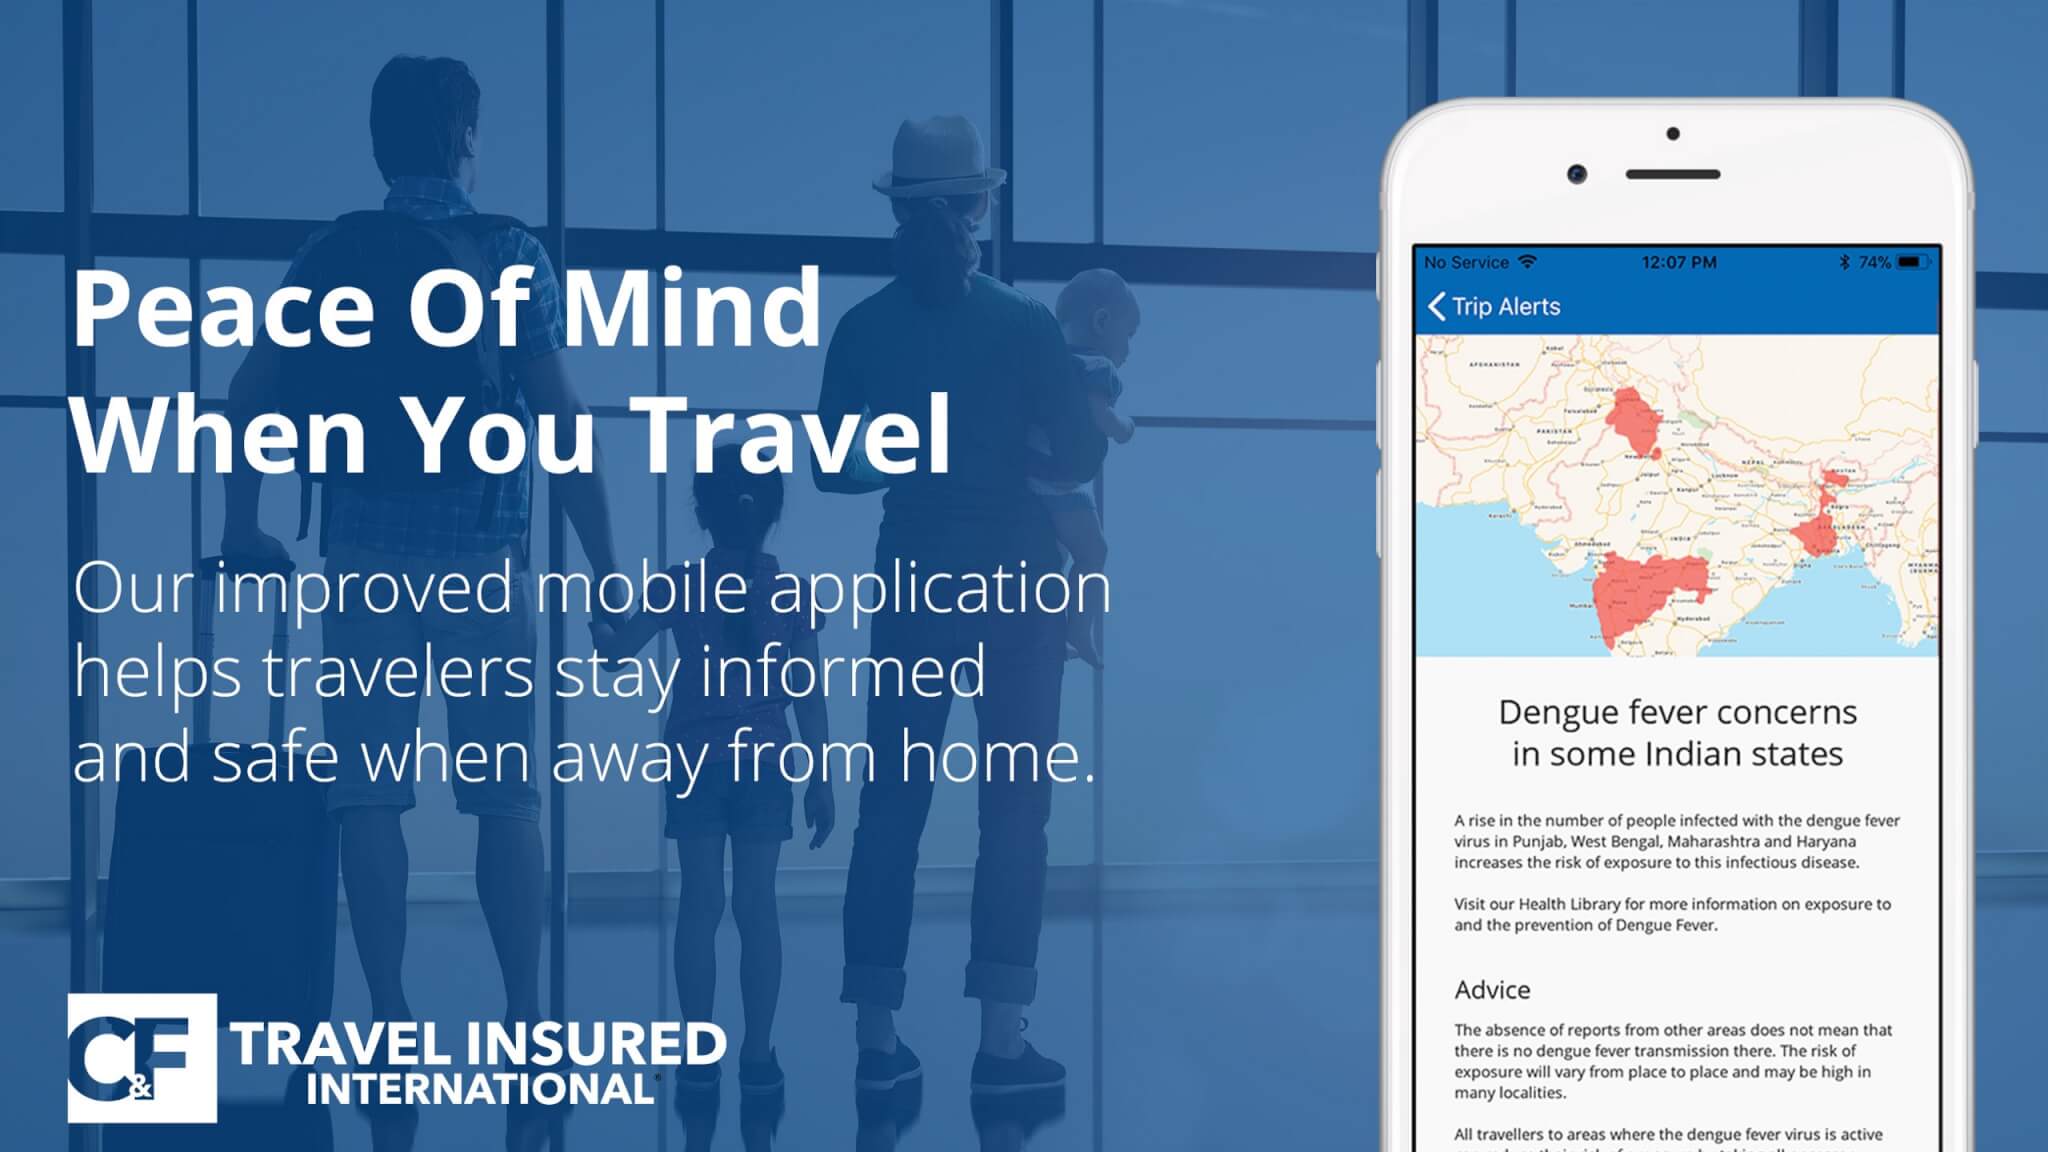 Sitata And Travel Insured International Announce Innovation Partnership To Keep Travelers Out of Harms Way